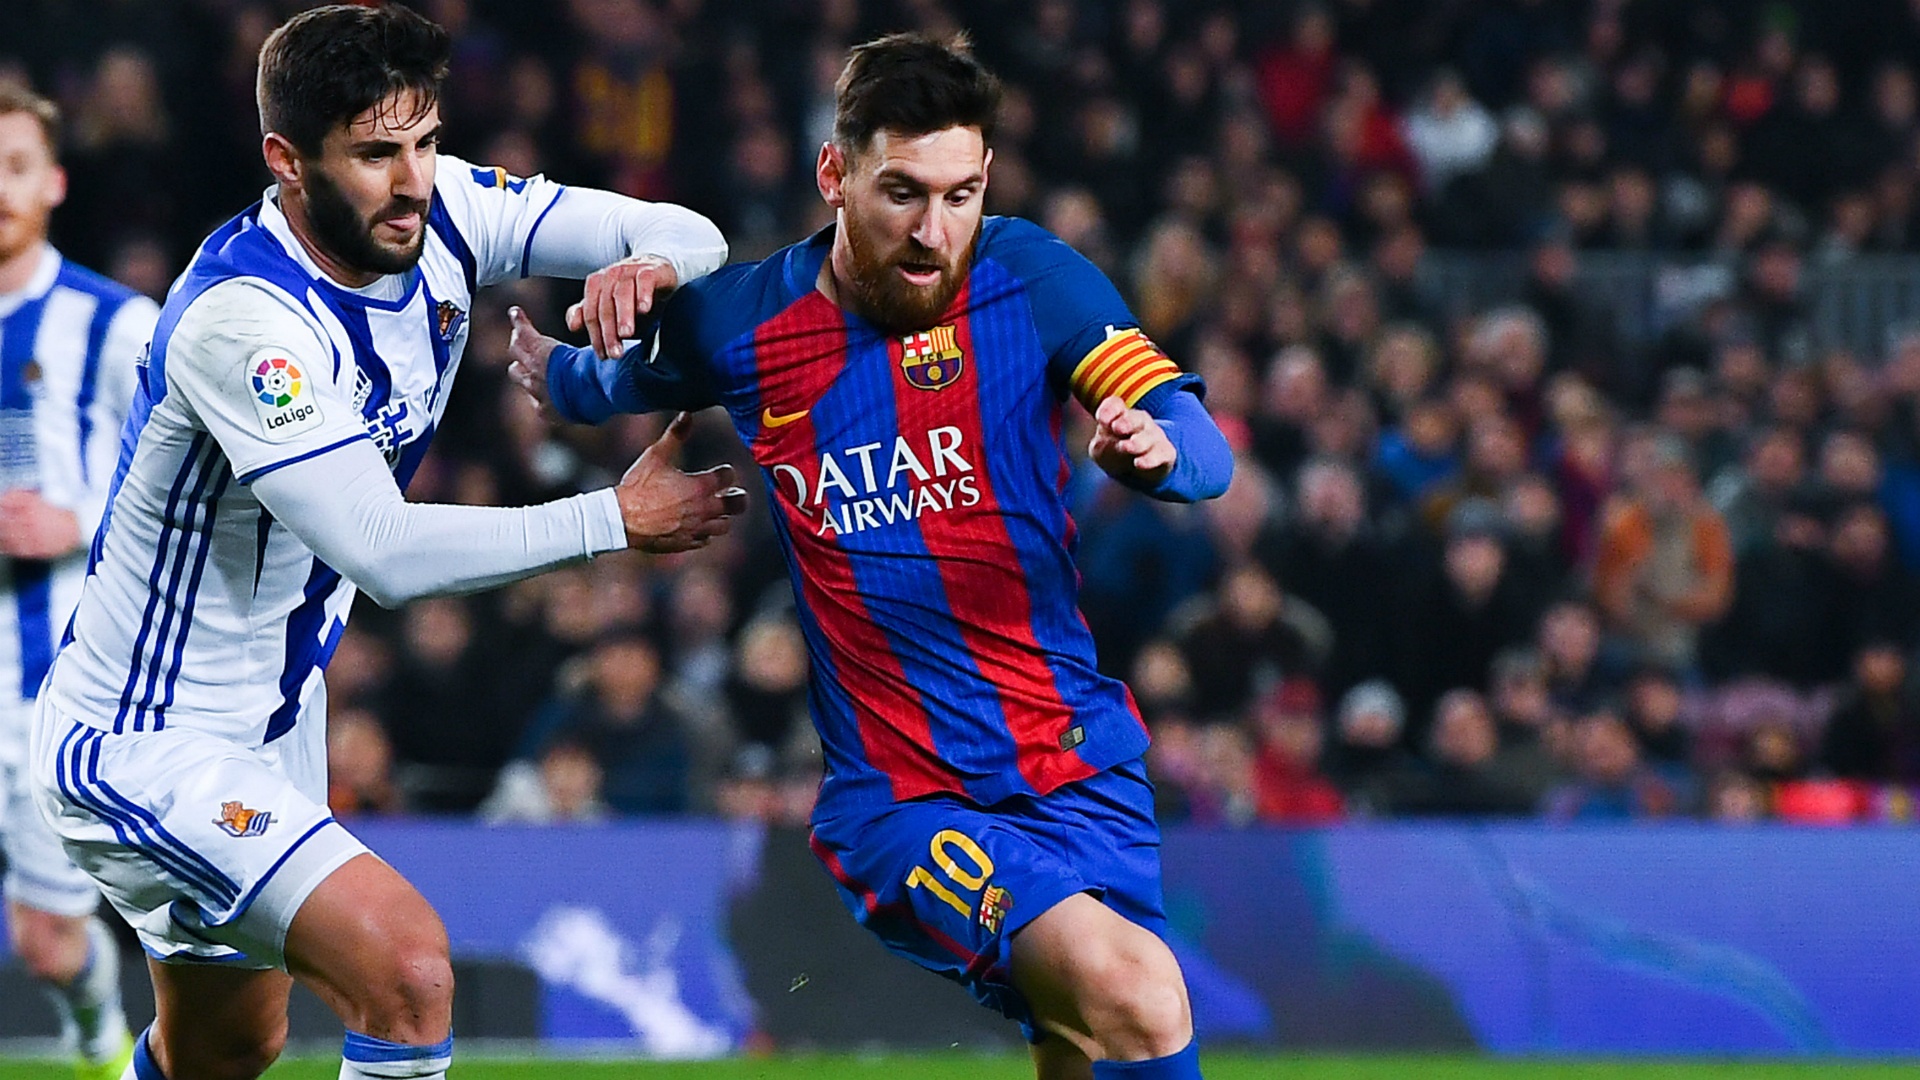 Messi can play wherever he wants for Barca - Luis Enrique